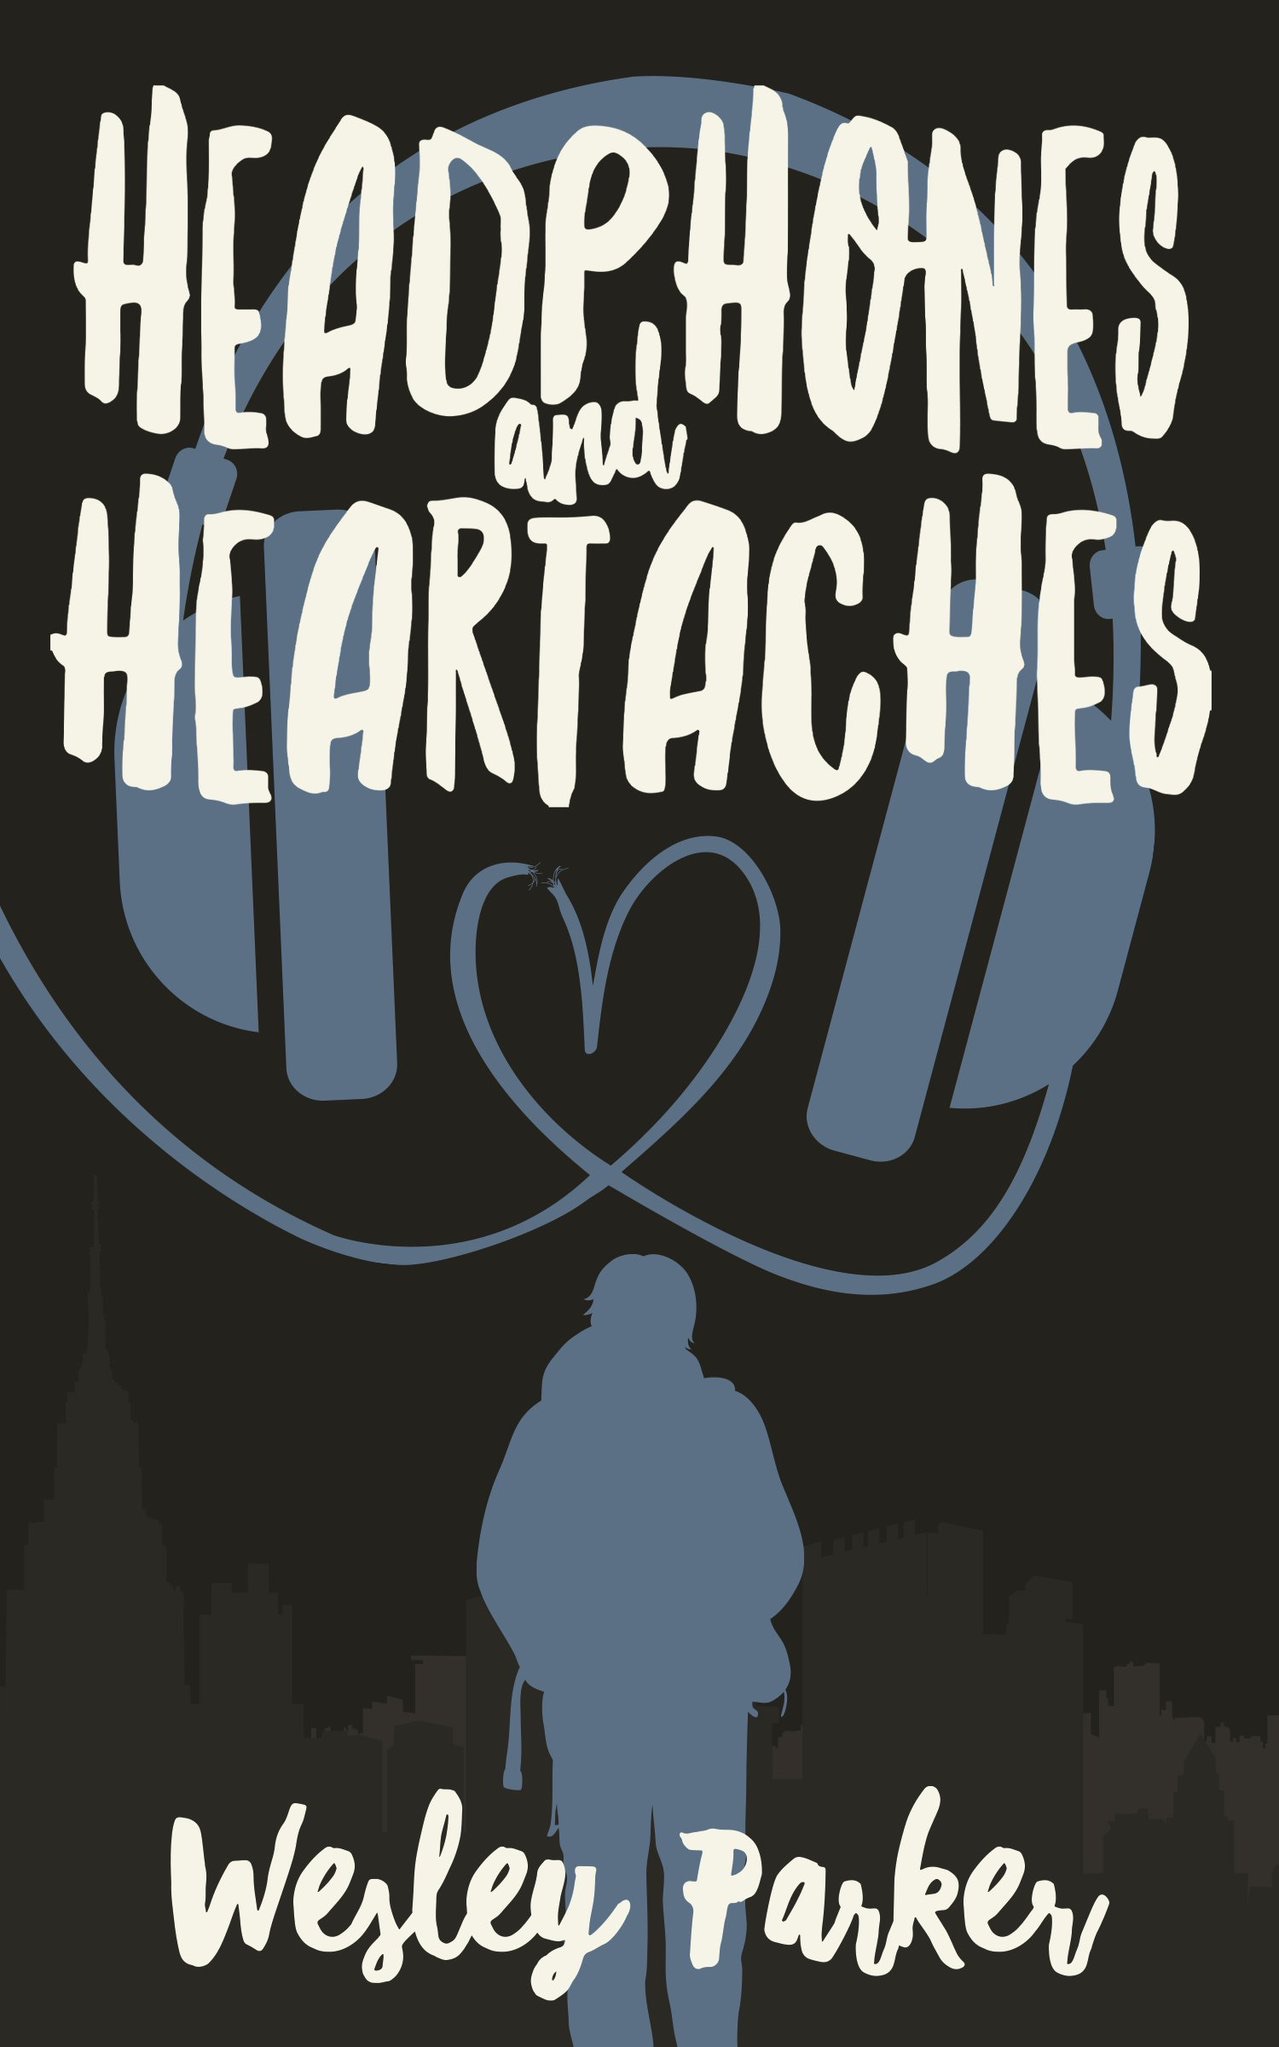 Headphones and Heartaches book cover.